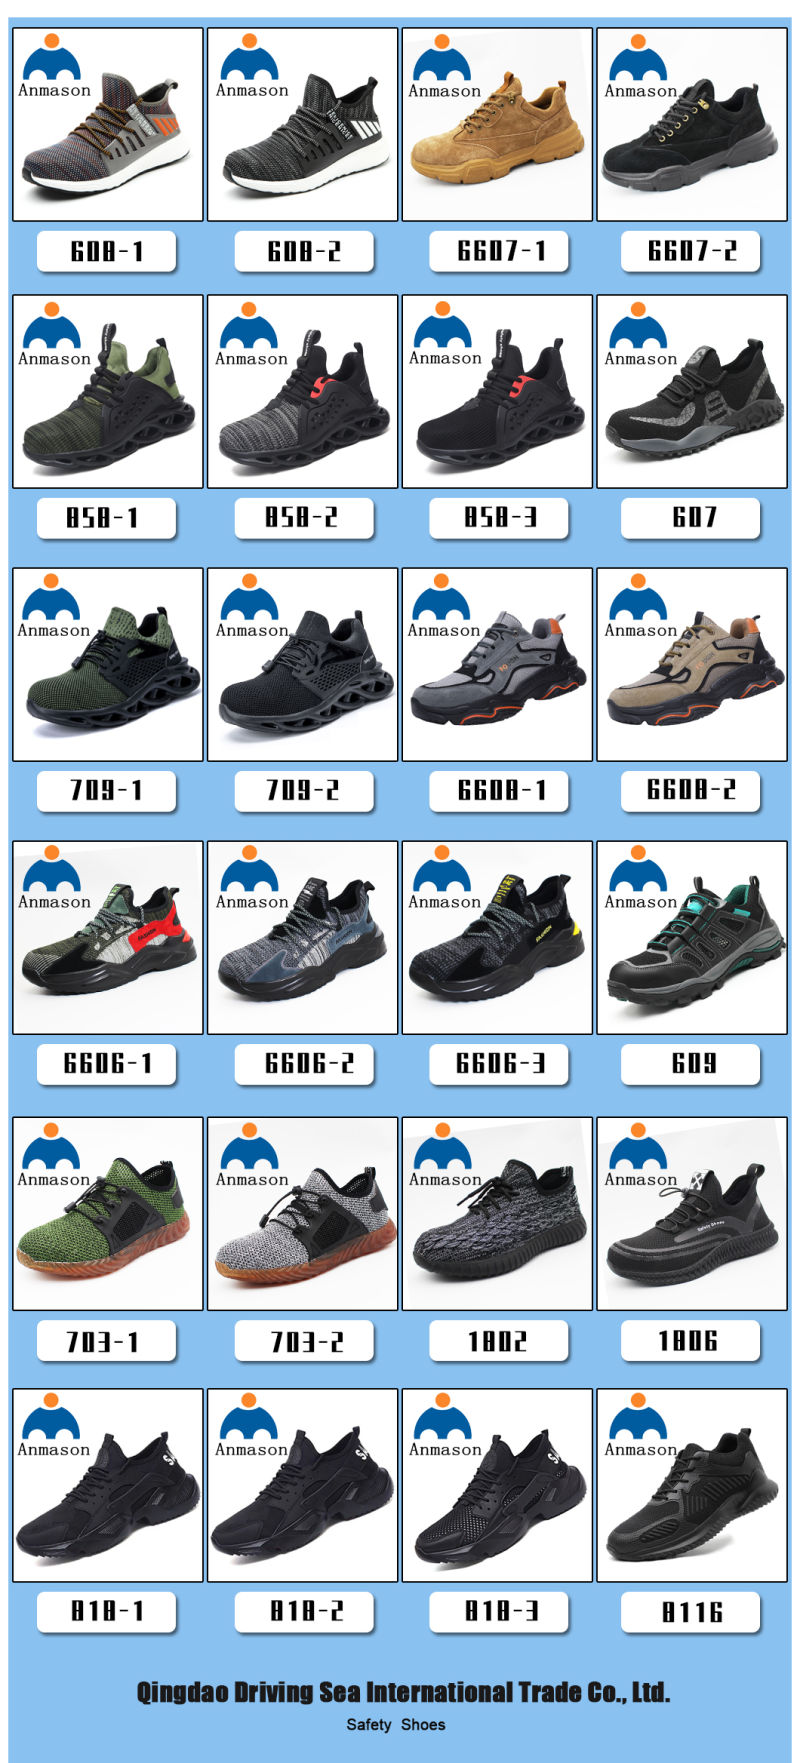 Safety Shoes Men Industrial Shoes Safety Work Price in Qingdao